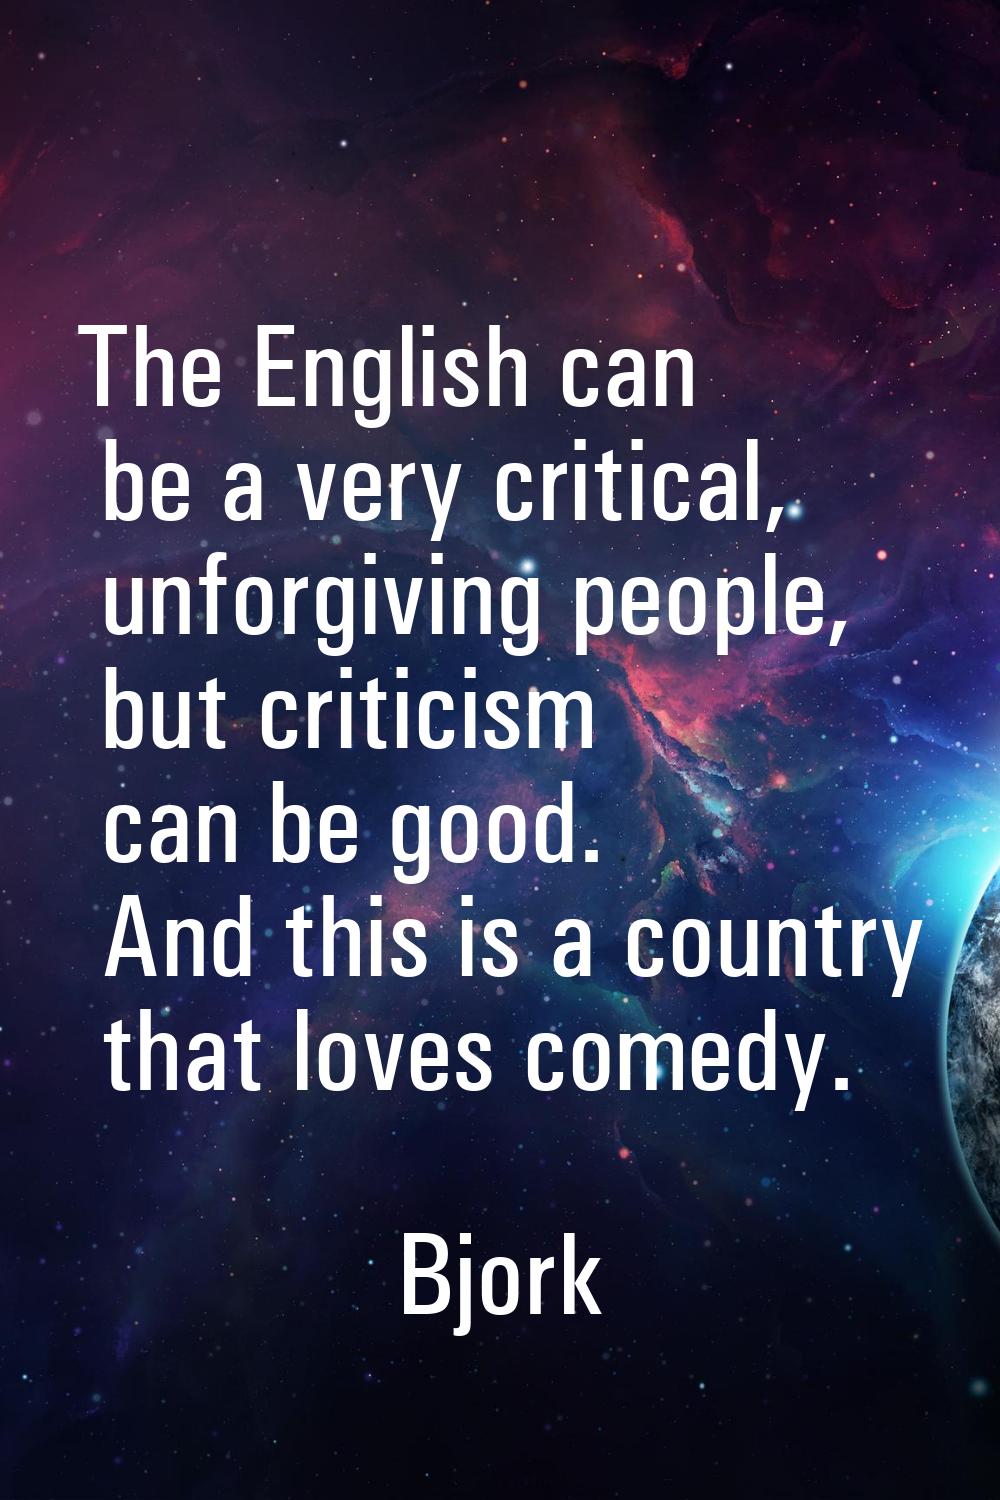 The English can be a very critical, unforgiving people, but criticism can be good. And this is a co